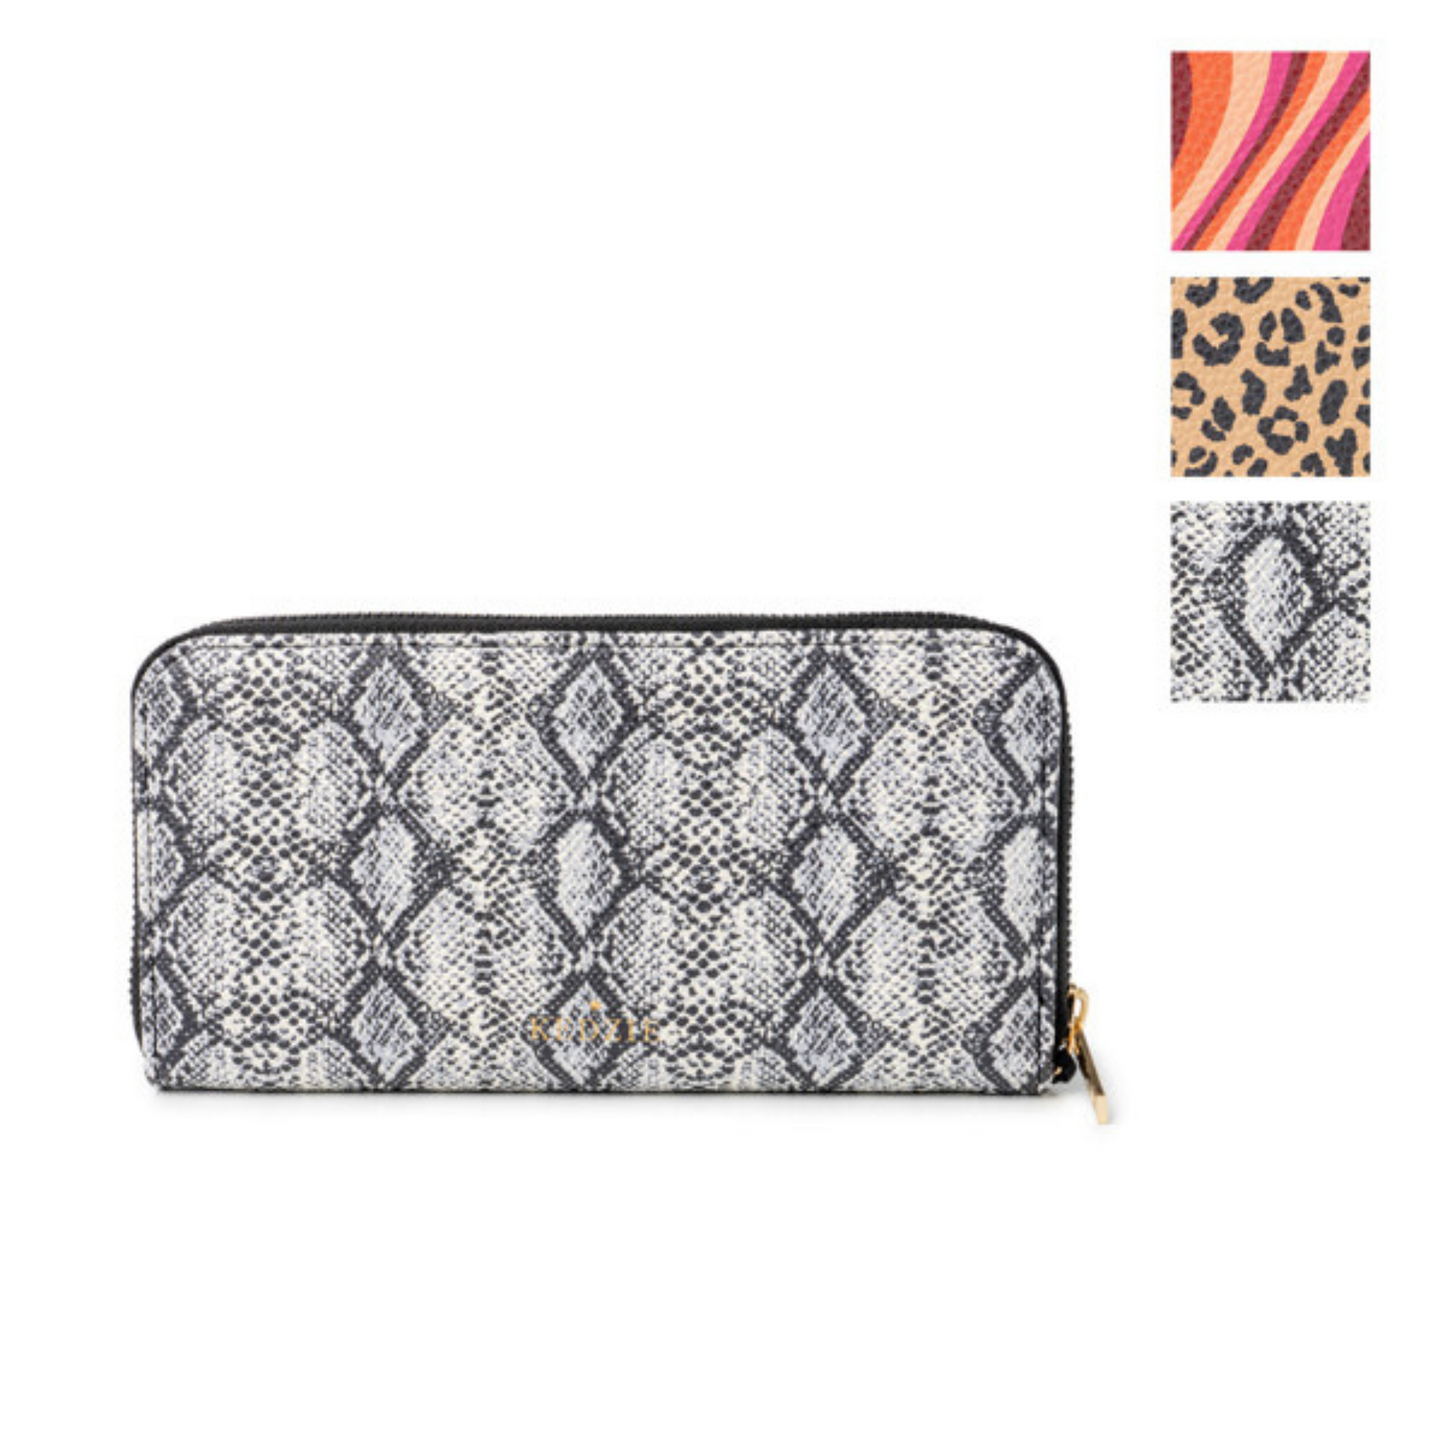 Carry valuables in style with this Patterned Eclipse Zip-Around Clutch. It comes with 8 card slots, a built-in ID holder, and an interior slip pocket for all your daily essentials. Plus, a neutral cheetah print lining and a bonus wristlet strap provide two ways to carry. A zippered pocket keeps your valuables secure and a handhold offers an easy grip. Enjoy smooth-glide resin zippers for effortless opening and closing. Available in Snake Print, Pink Swirl, or Cheetah Print.